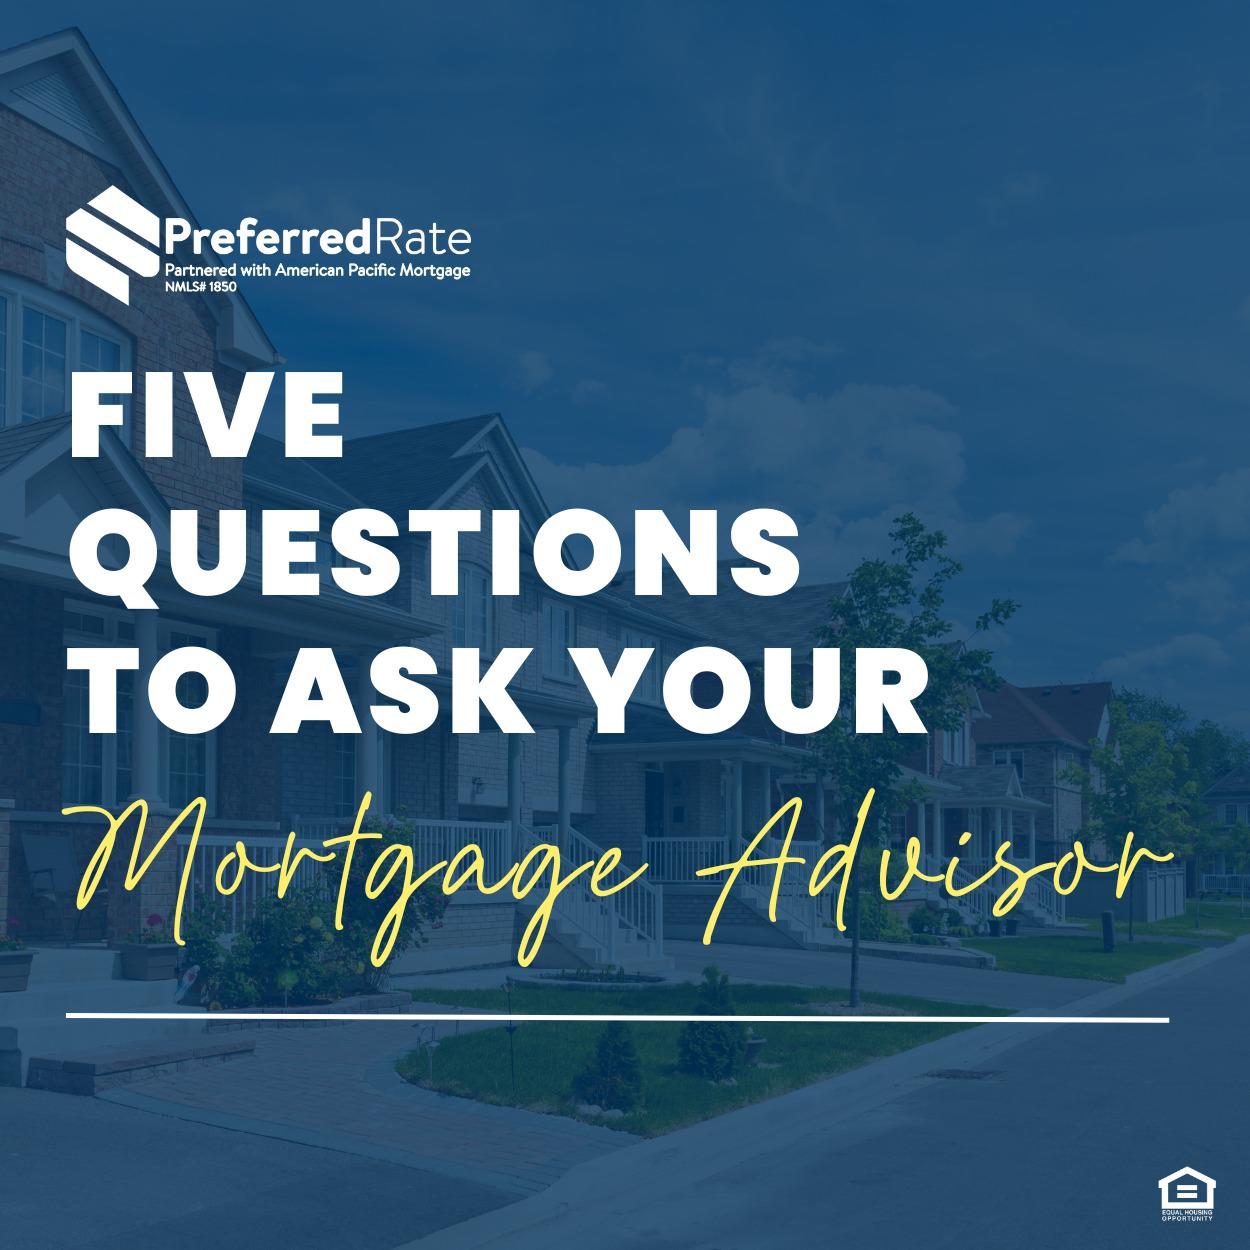 Having a list of mortgage questions to ask your mortgage advisor is just the start. Knowing the answers you’re looking for puts you ahead of the game. These mortgage questions will help you find the best home loan from the right lender.

- What type of mortgage is best for me?
- How much downpayment will I need?
- Do I qualify for any down payment assistance programs?
- What is the annual percentage rate?
- Are you doing a hard credit check on me today?

Ready to chat? Reach out today!